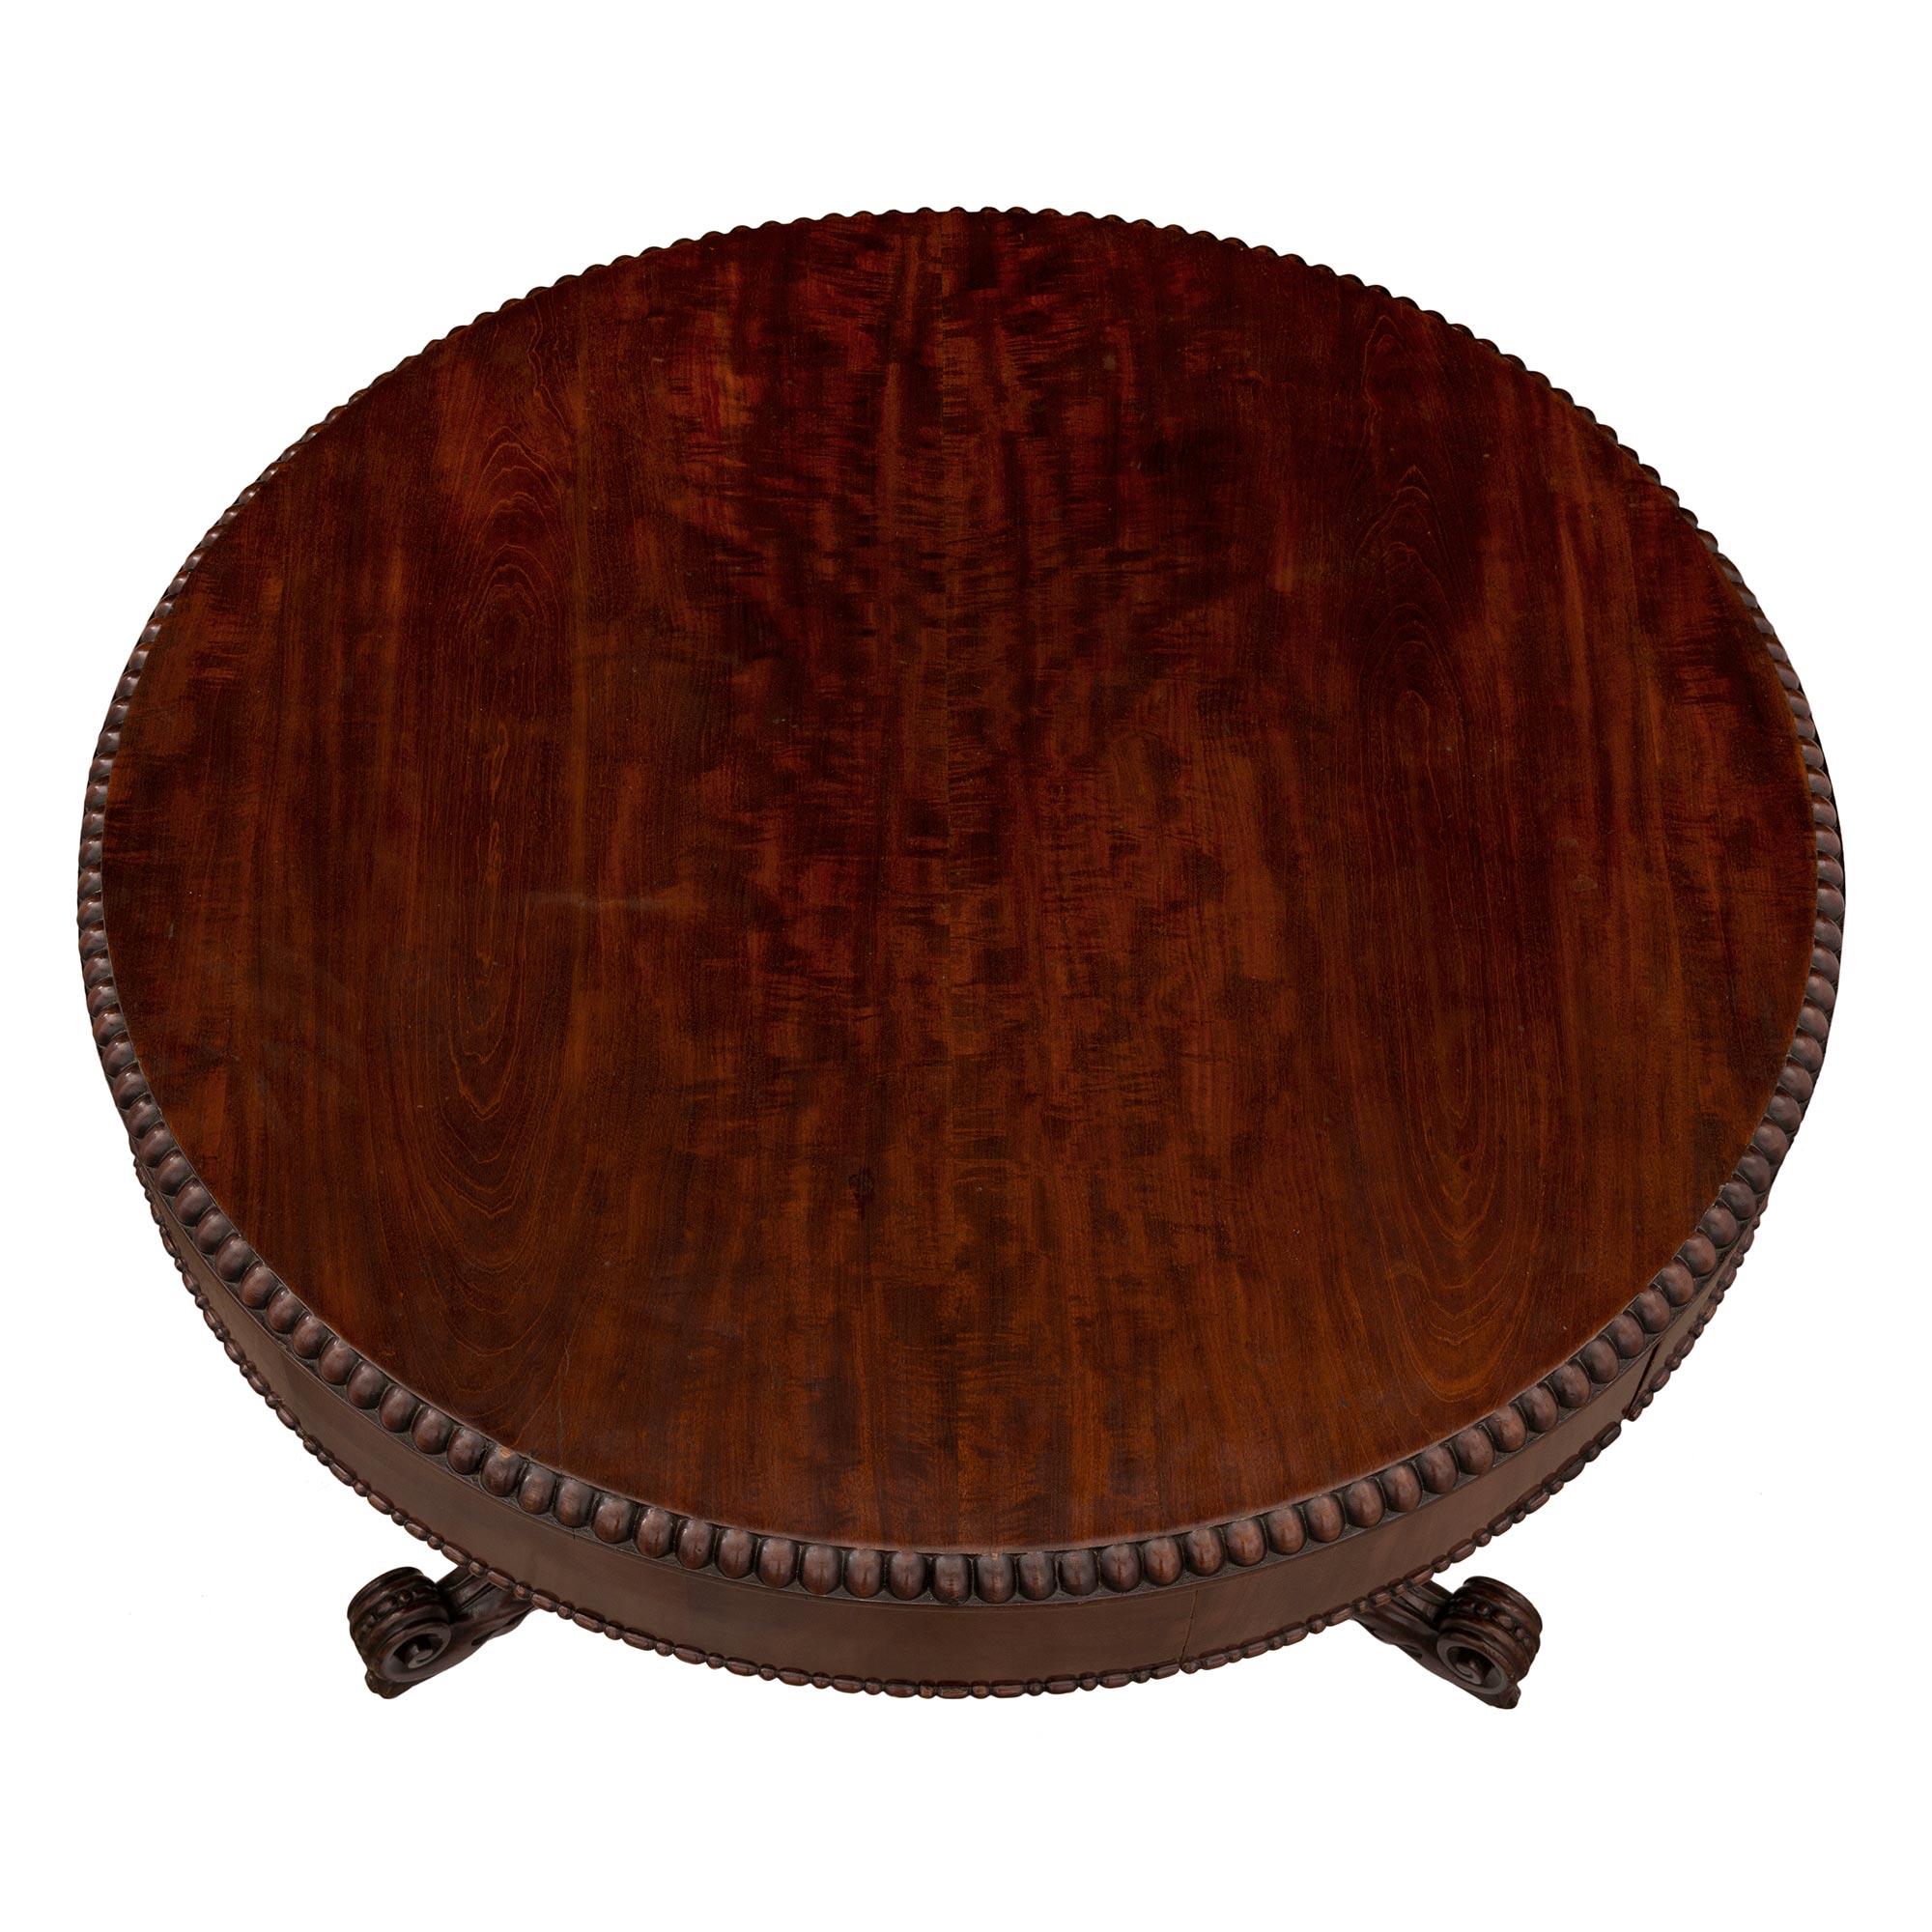 A most handsome English 19th century Regency st. flamed mahogany center table. The circular table is raised on its original carved wood casters below a beautiful finely carved tripod base. The base displays large acanthus leaves and an elegant